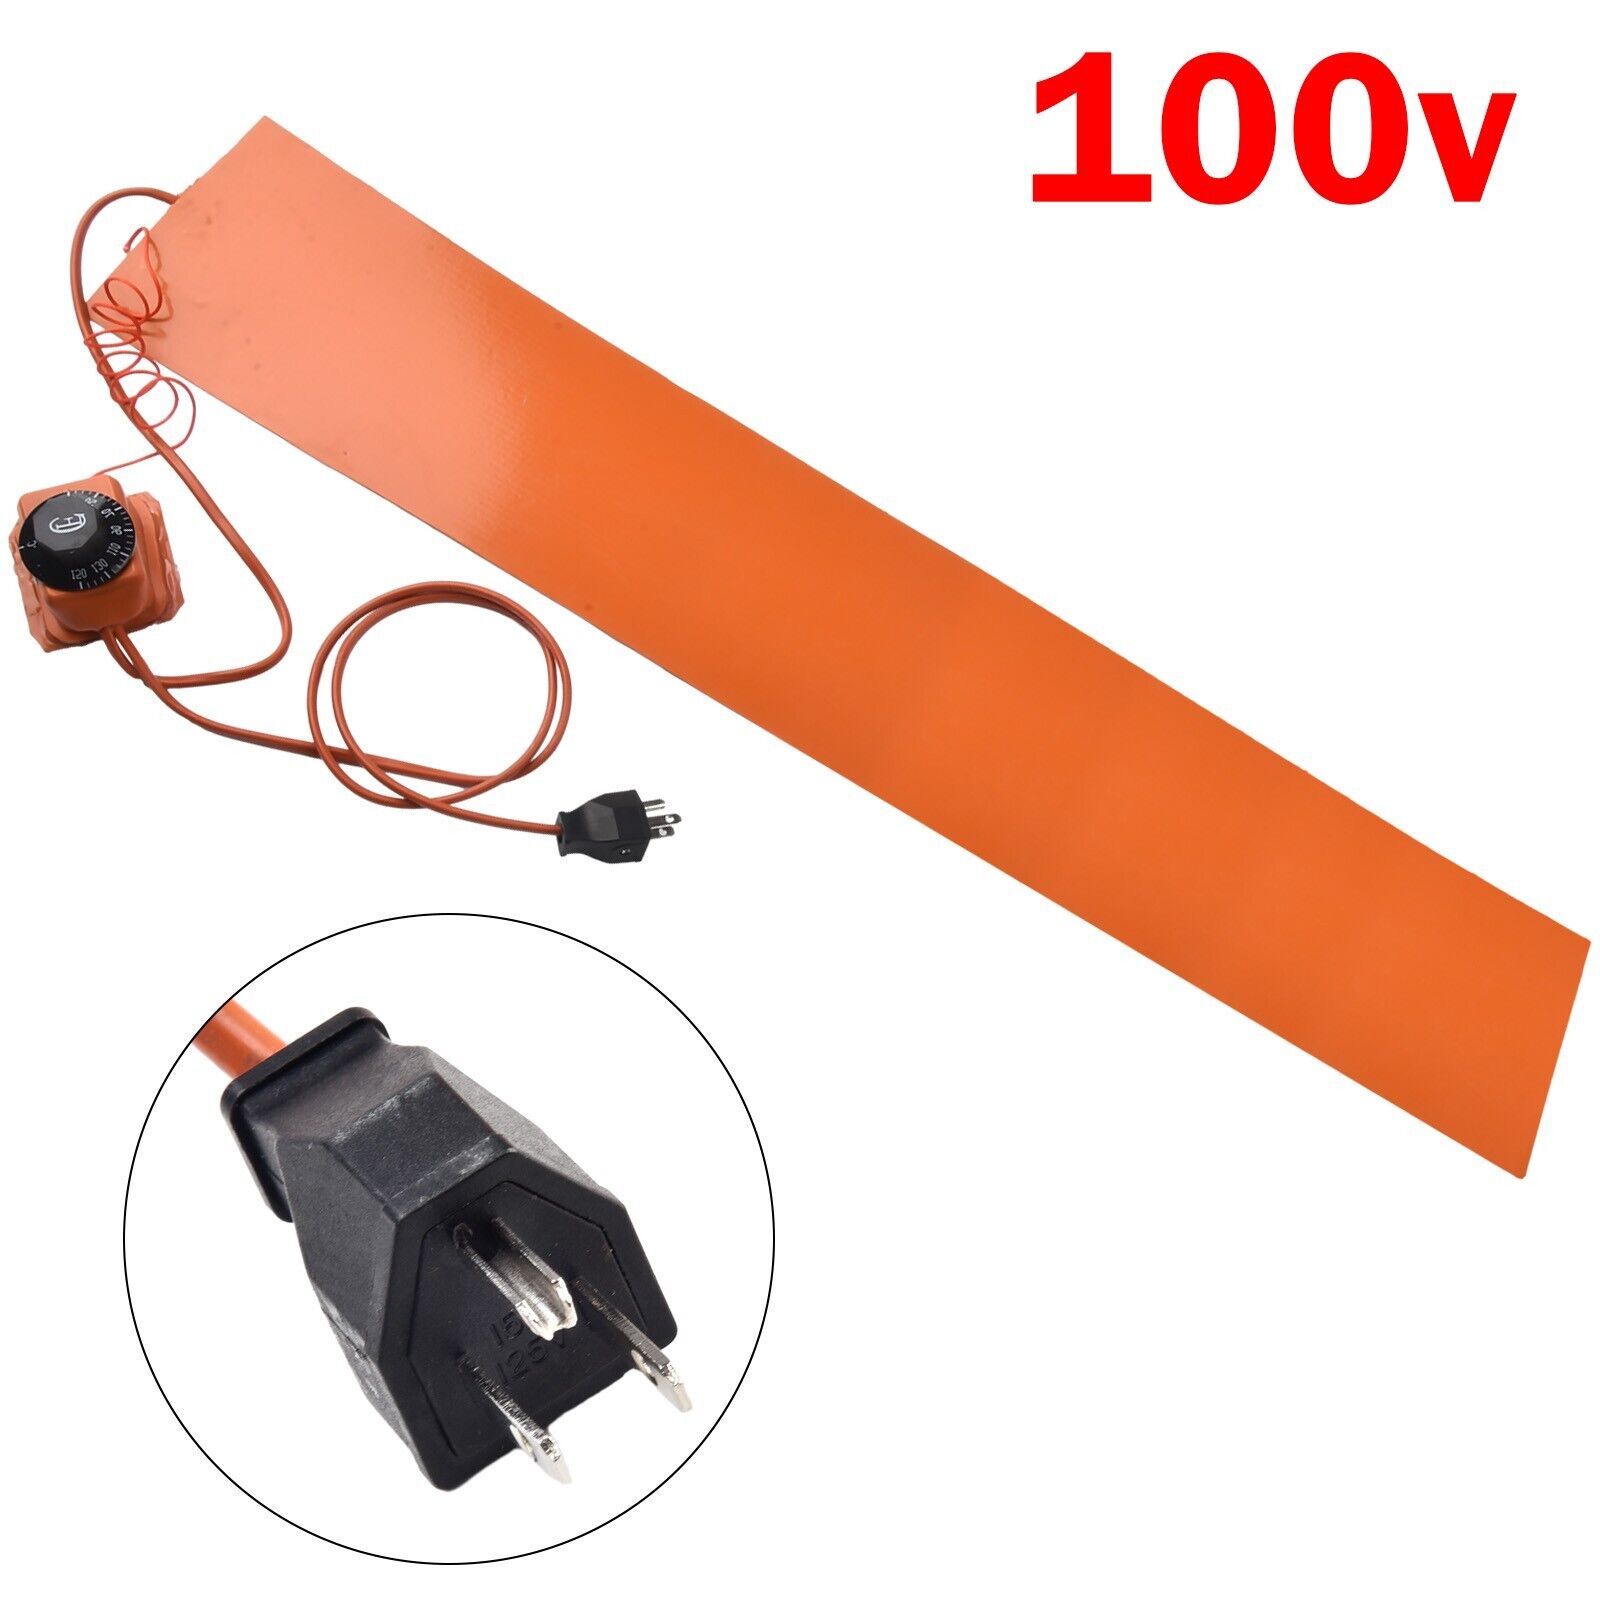 1200W Silicone Heater Thermal Guitar Side Bending Heating Pad + Controller